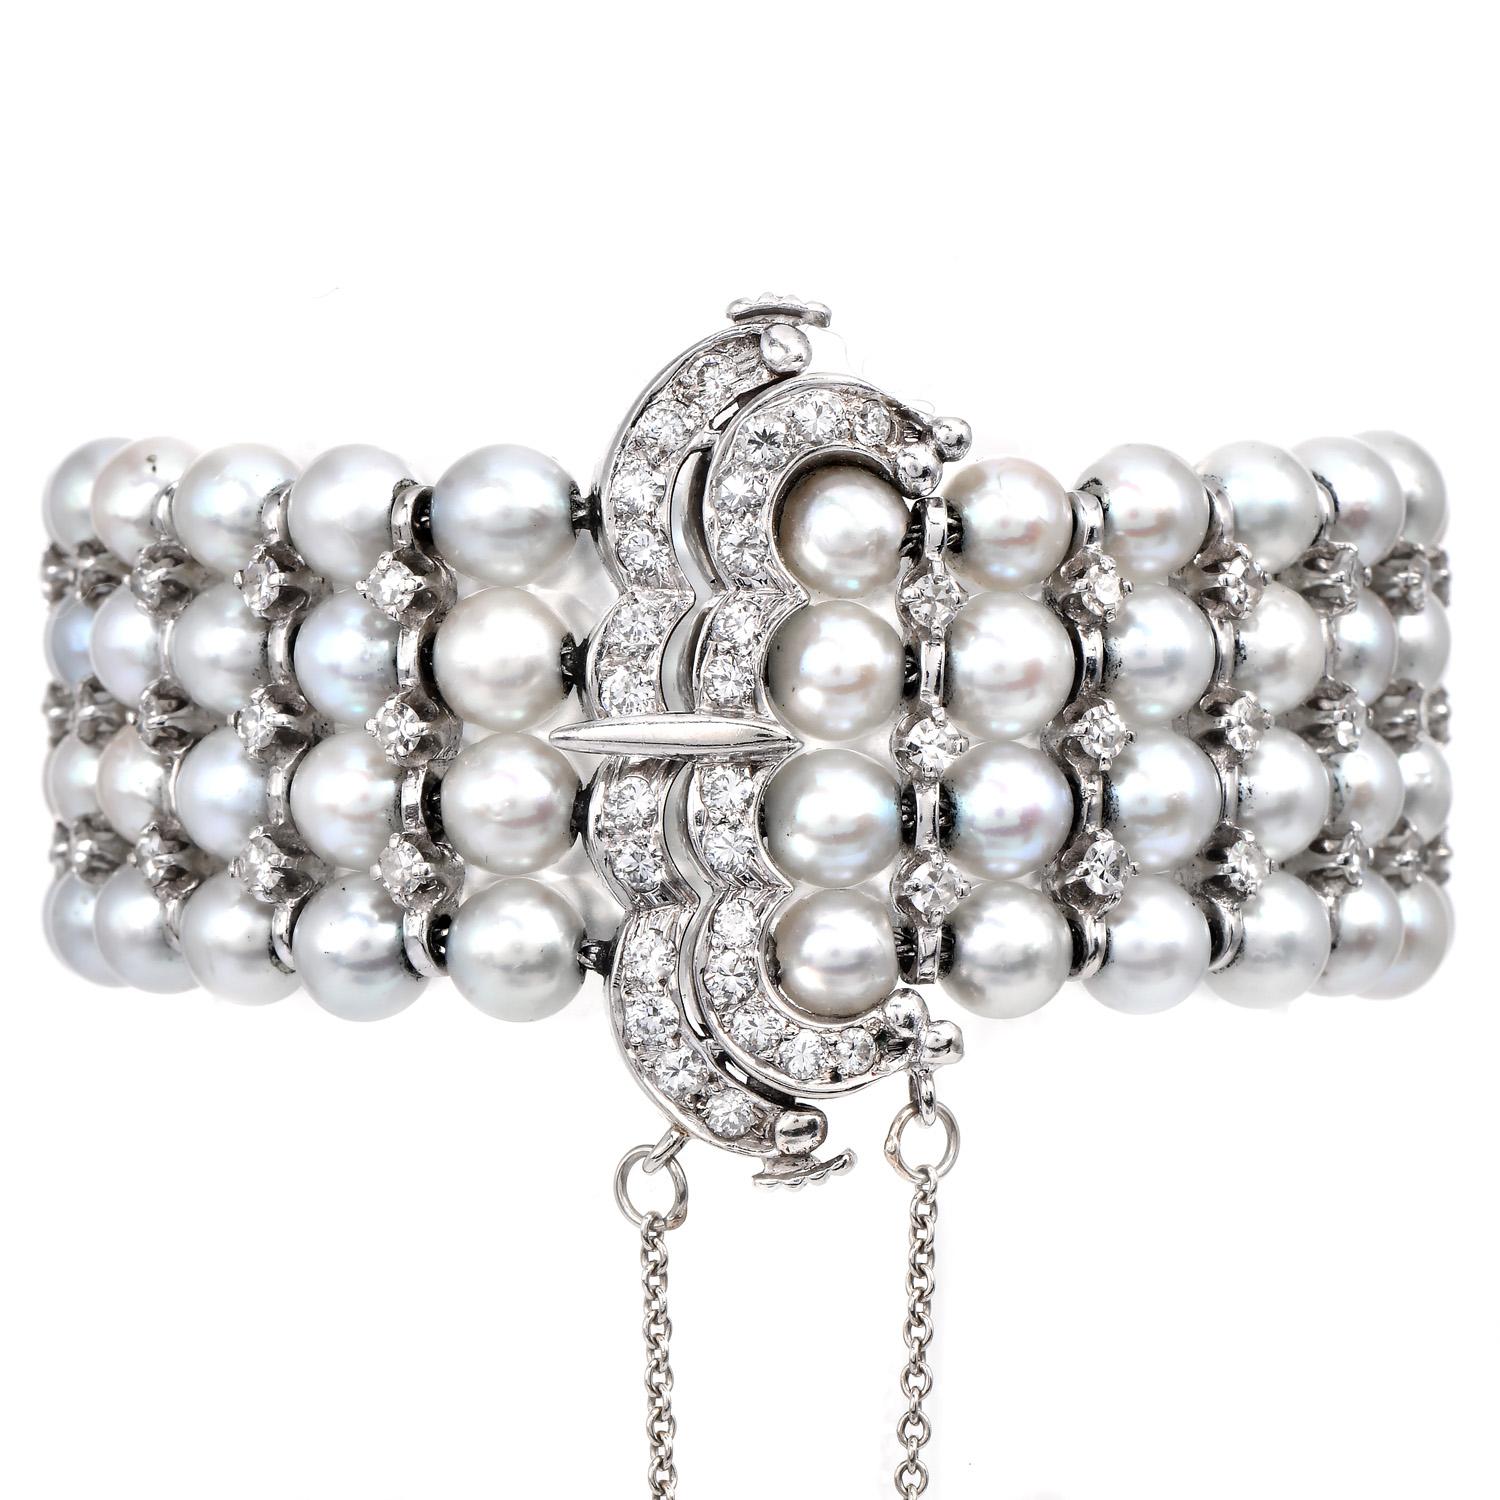 Vintage Genuine Akoya pear wrap-around Bracelet with diamond belt design clasp. it is adorned with lustrous genuine pearls boasting delicate pink, cream, and subtle blue hues. Skillfully aligned into four strands.

Interlaced with round-cut natural